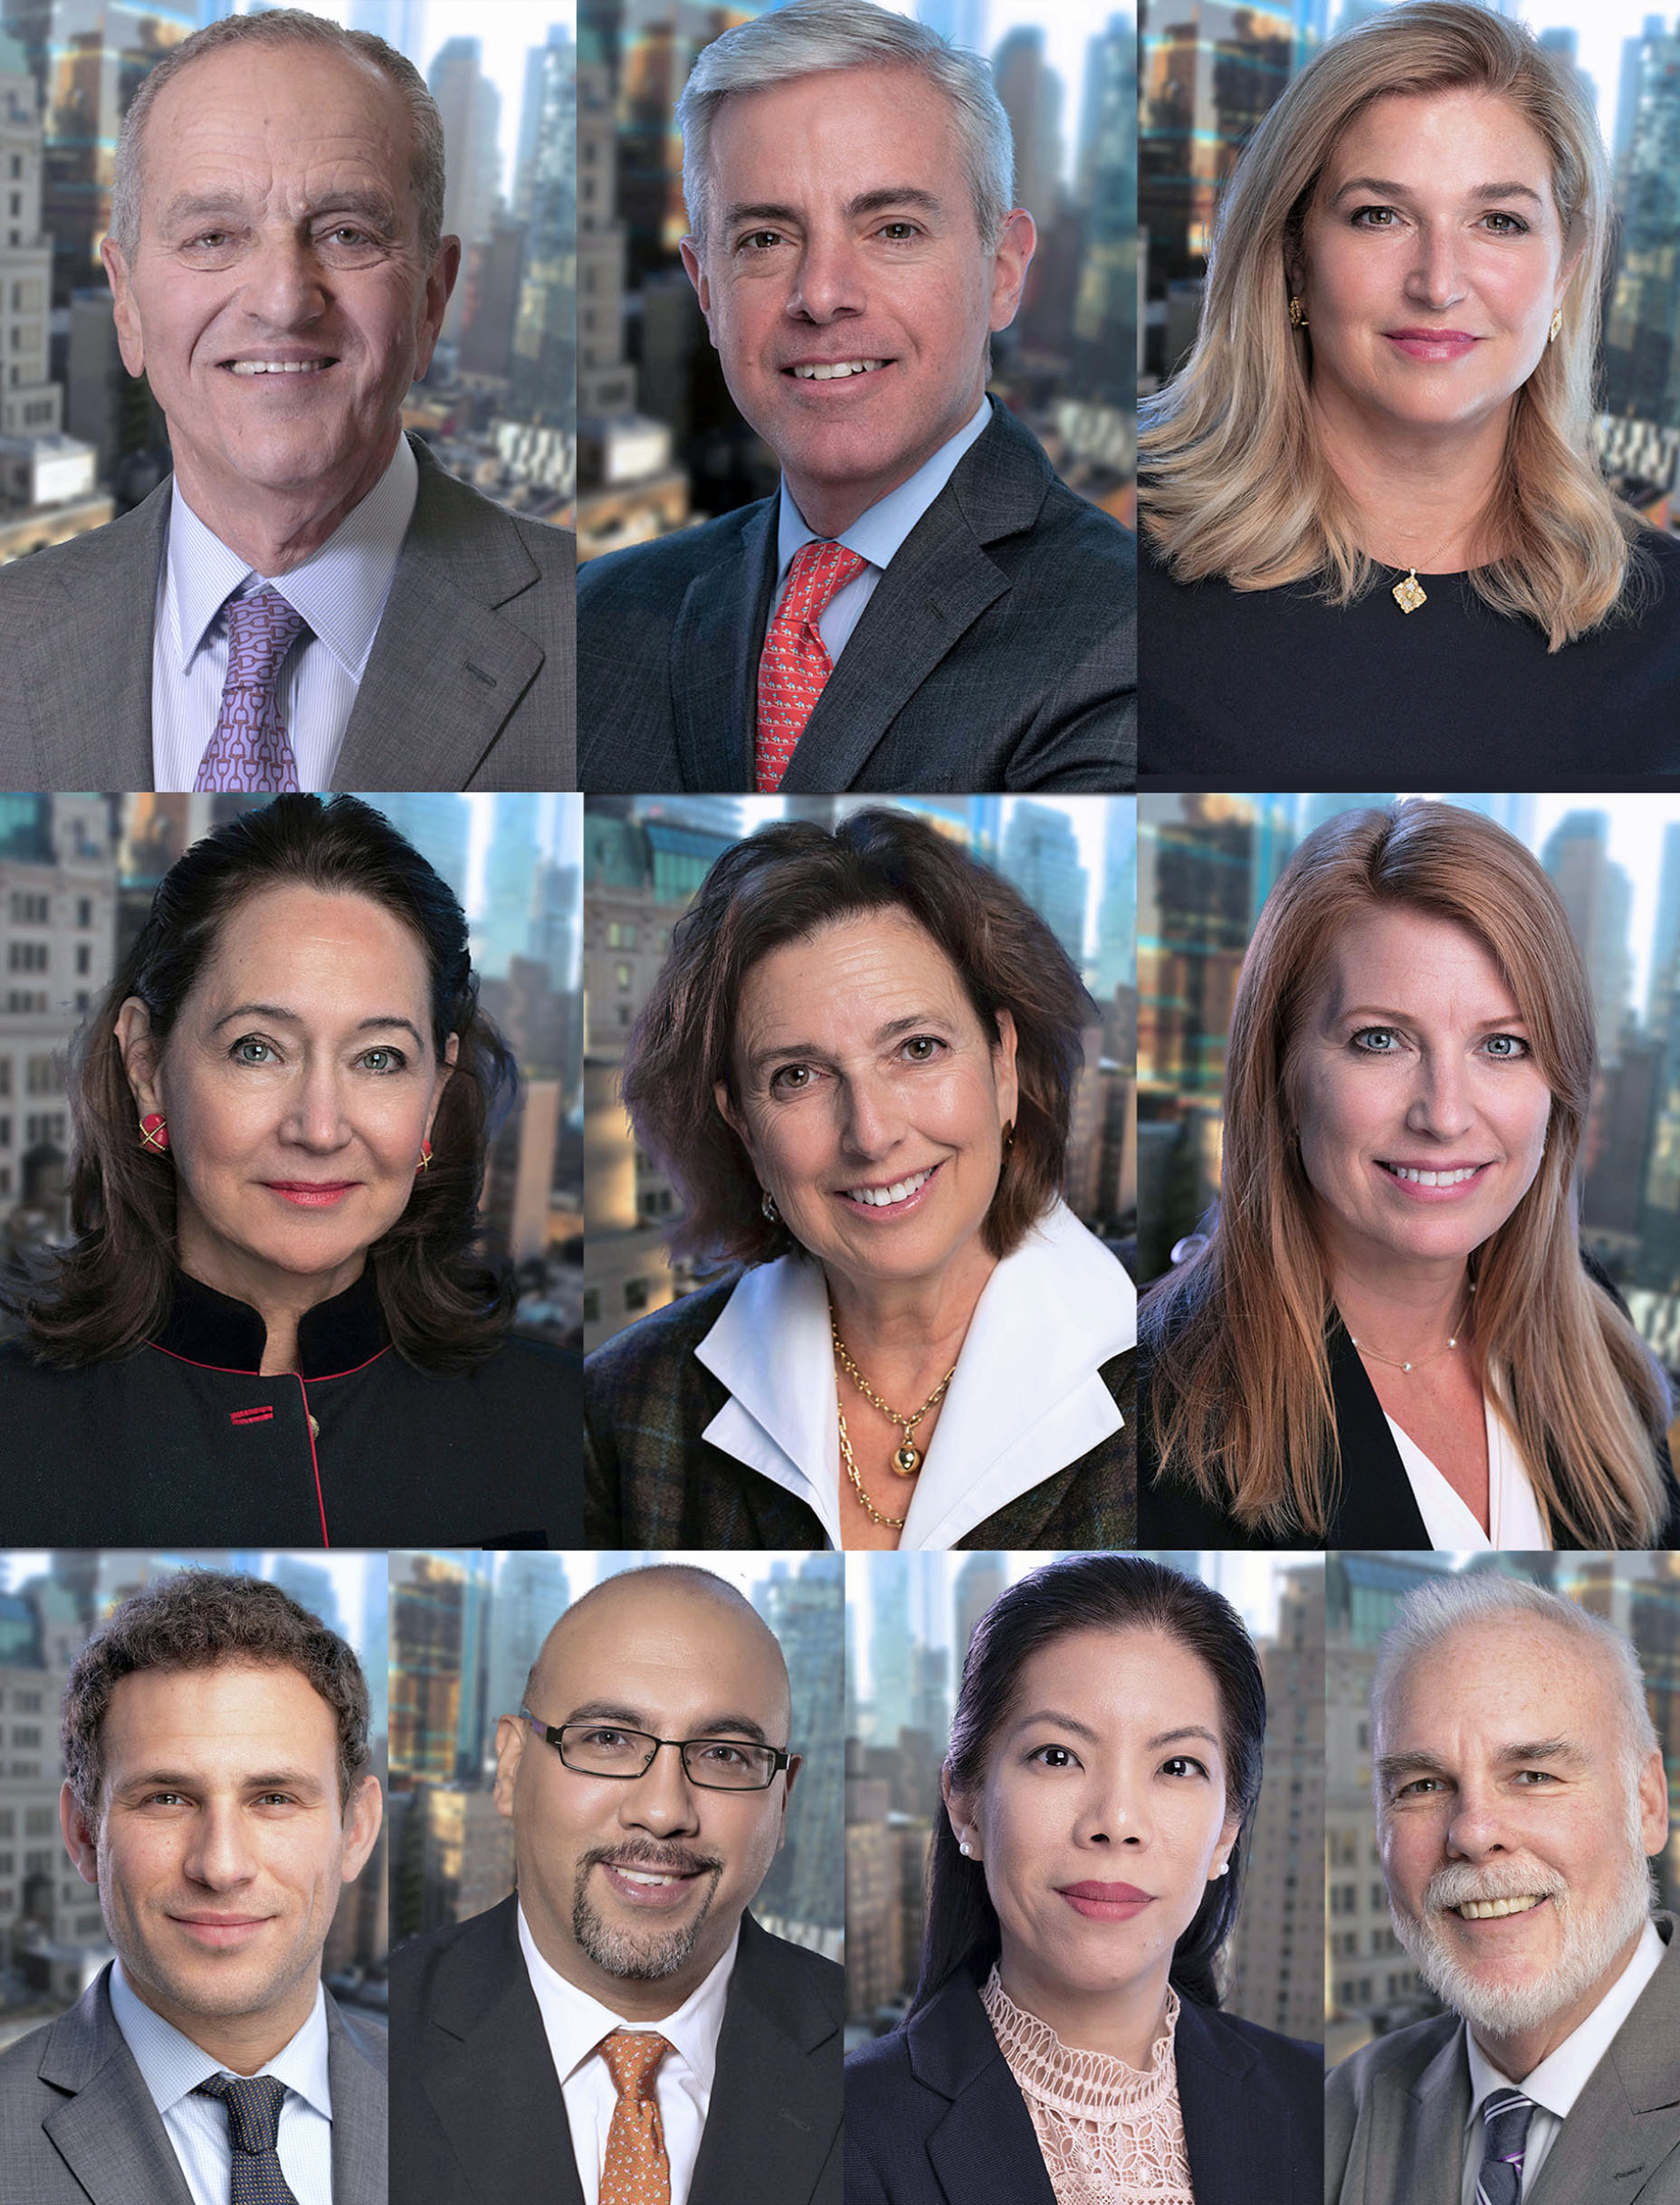 MORGAN STANLEY Investment Group Corporate Executive Wall Street Portraits by Tess Steinkolk Photographer